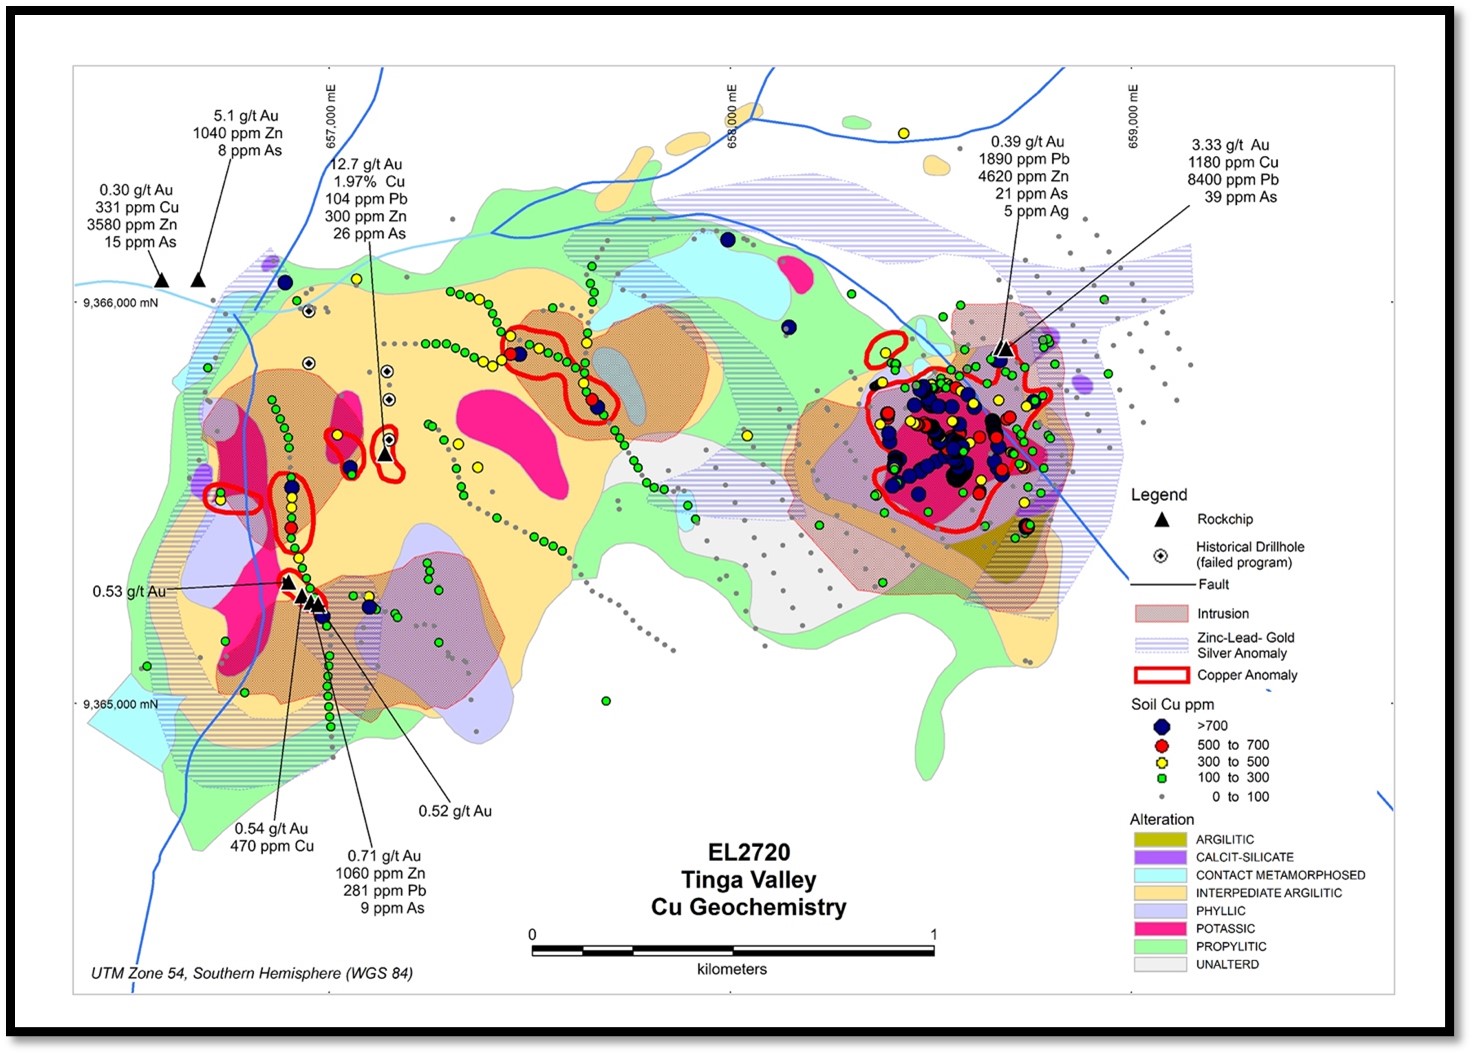 Tinga Valley - Alteration map and surface copper geochemistry from historic work